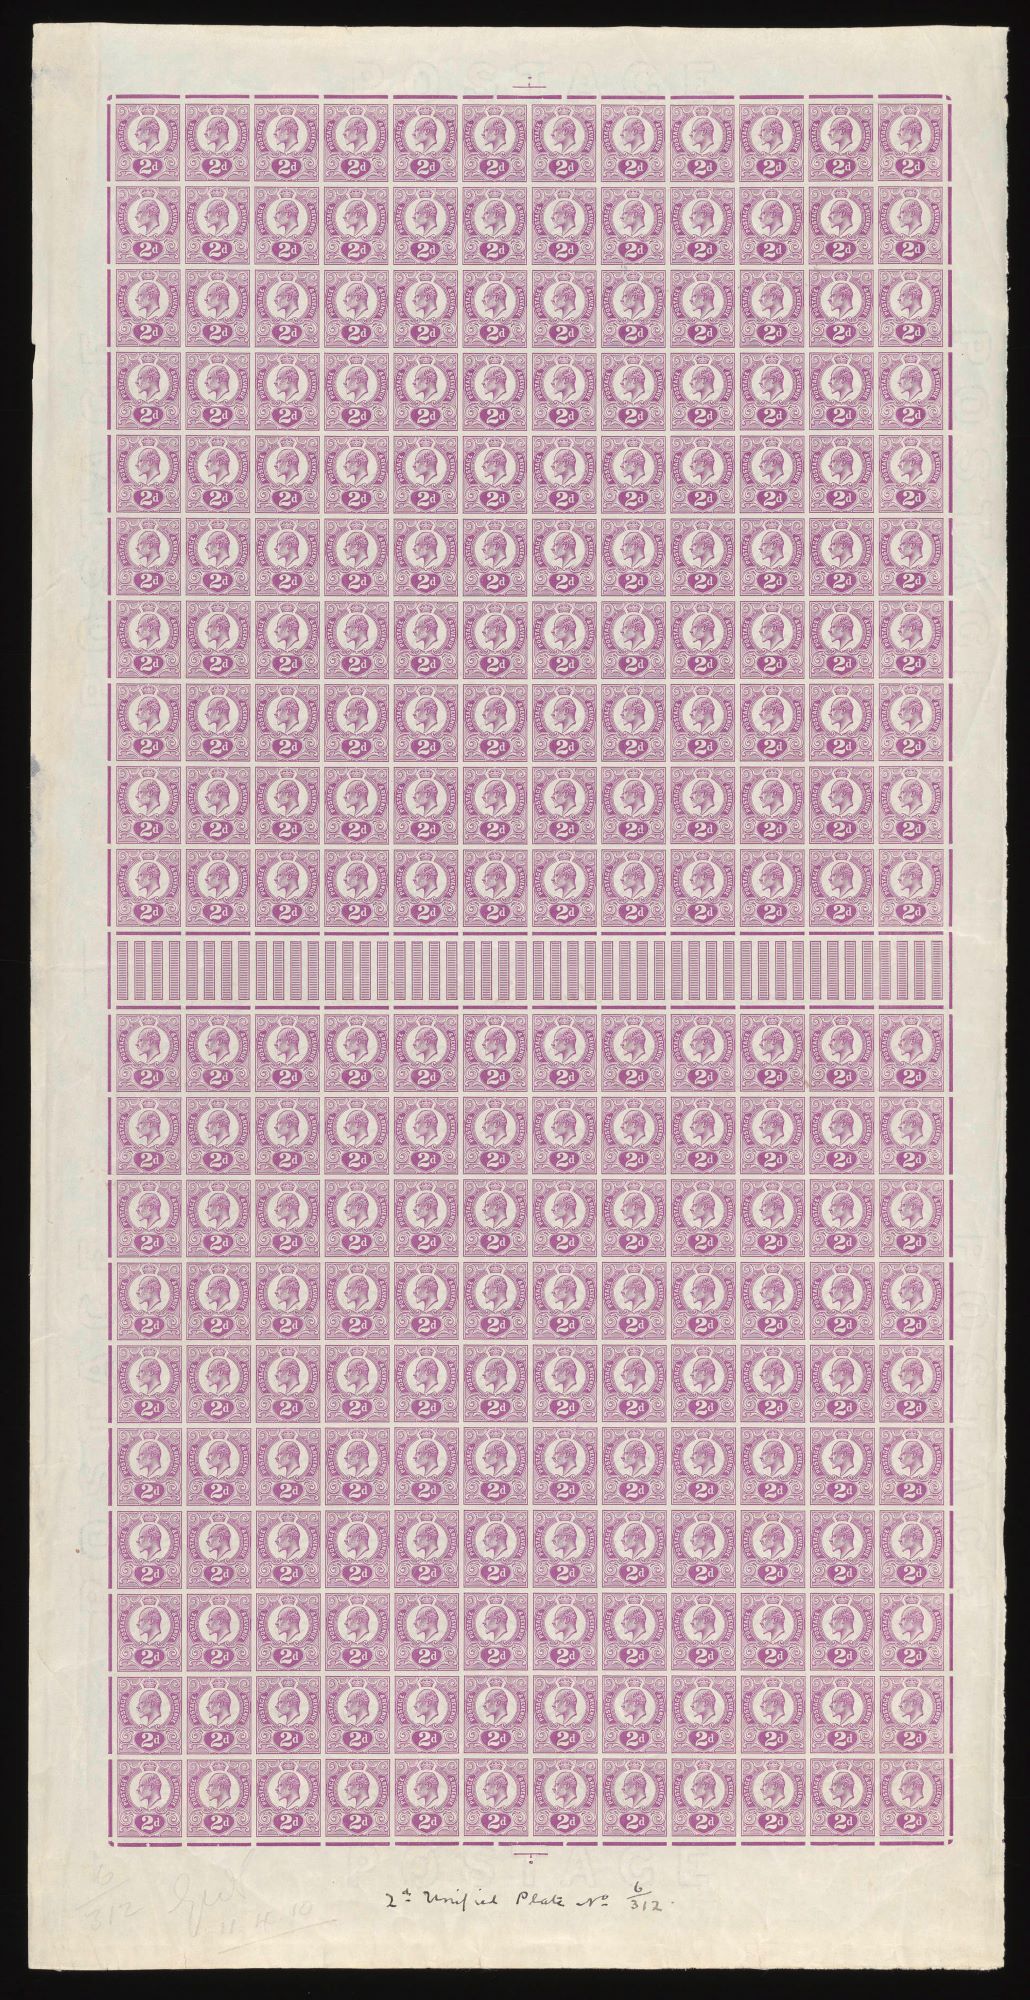 A grid of purple stamps printed on a cream sheet of paper, each showing a small portrait of King Edward VII and the letters '2d'.